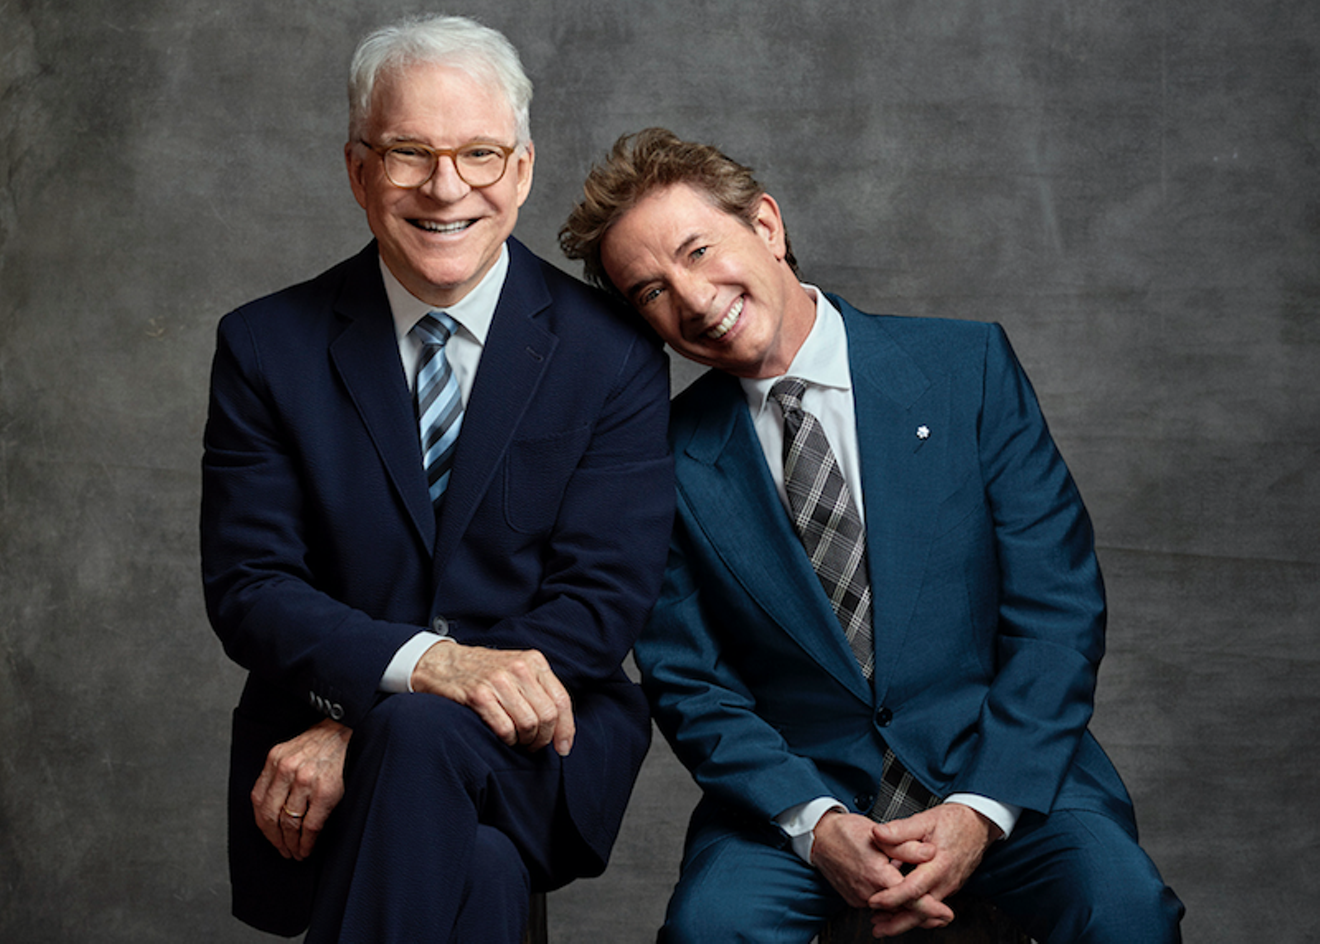 Join comedy legends Steve Martin and Martin Short for a trio of performances across the Front Range.